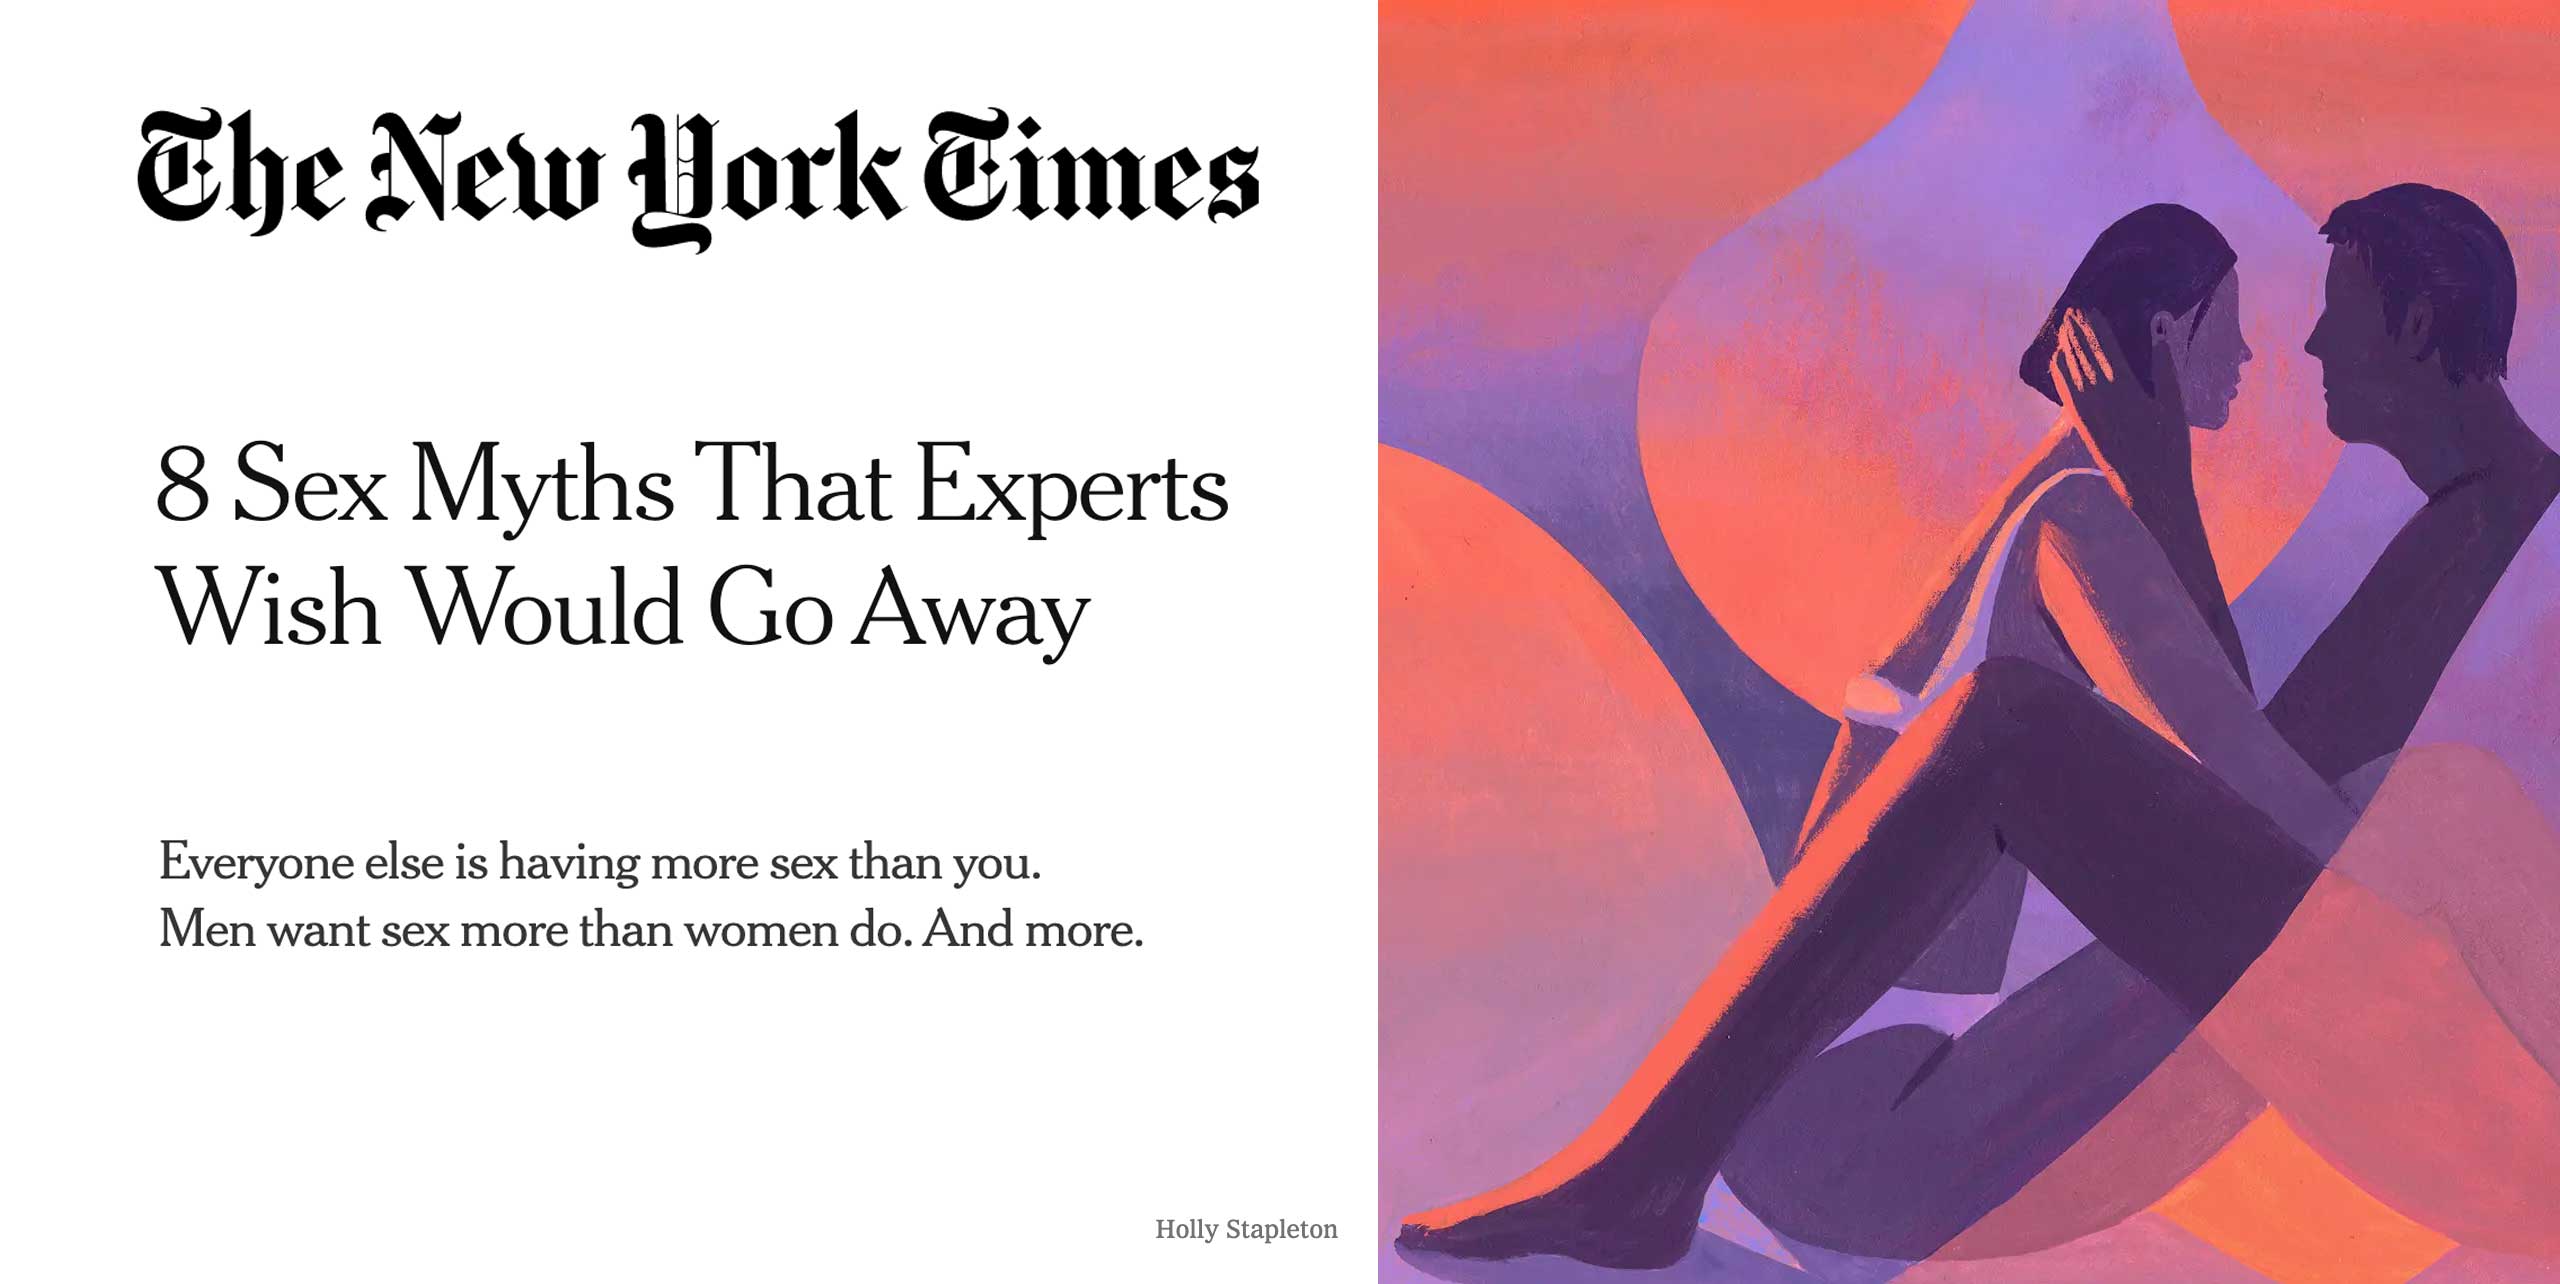 New York Times logo and illustration of couple embracing. Headline: 8 SEx Myths That Experts Wish Would Go Away Subheading: Everyone else is having more sex than you. Men want sex more than women do. And more.